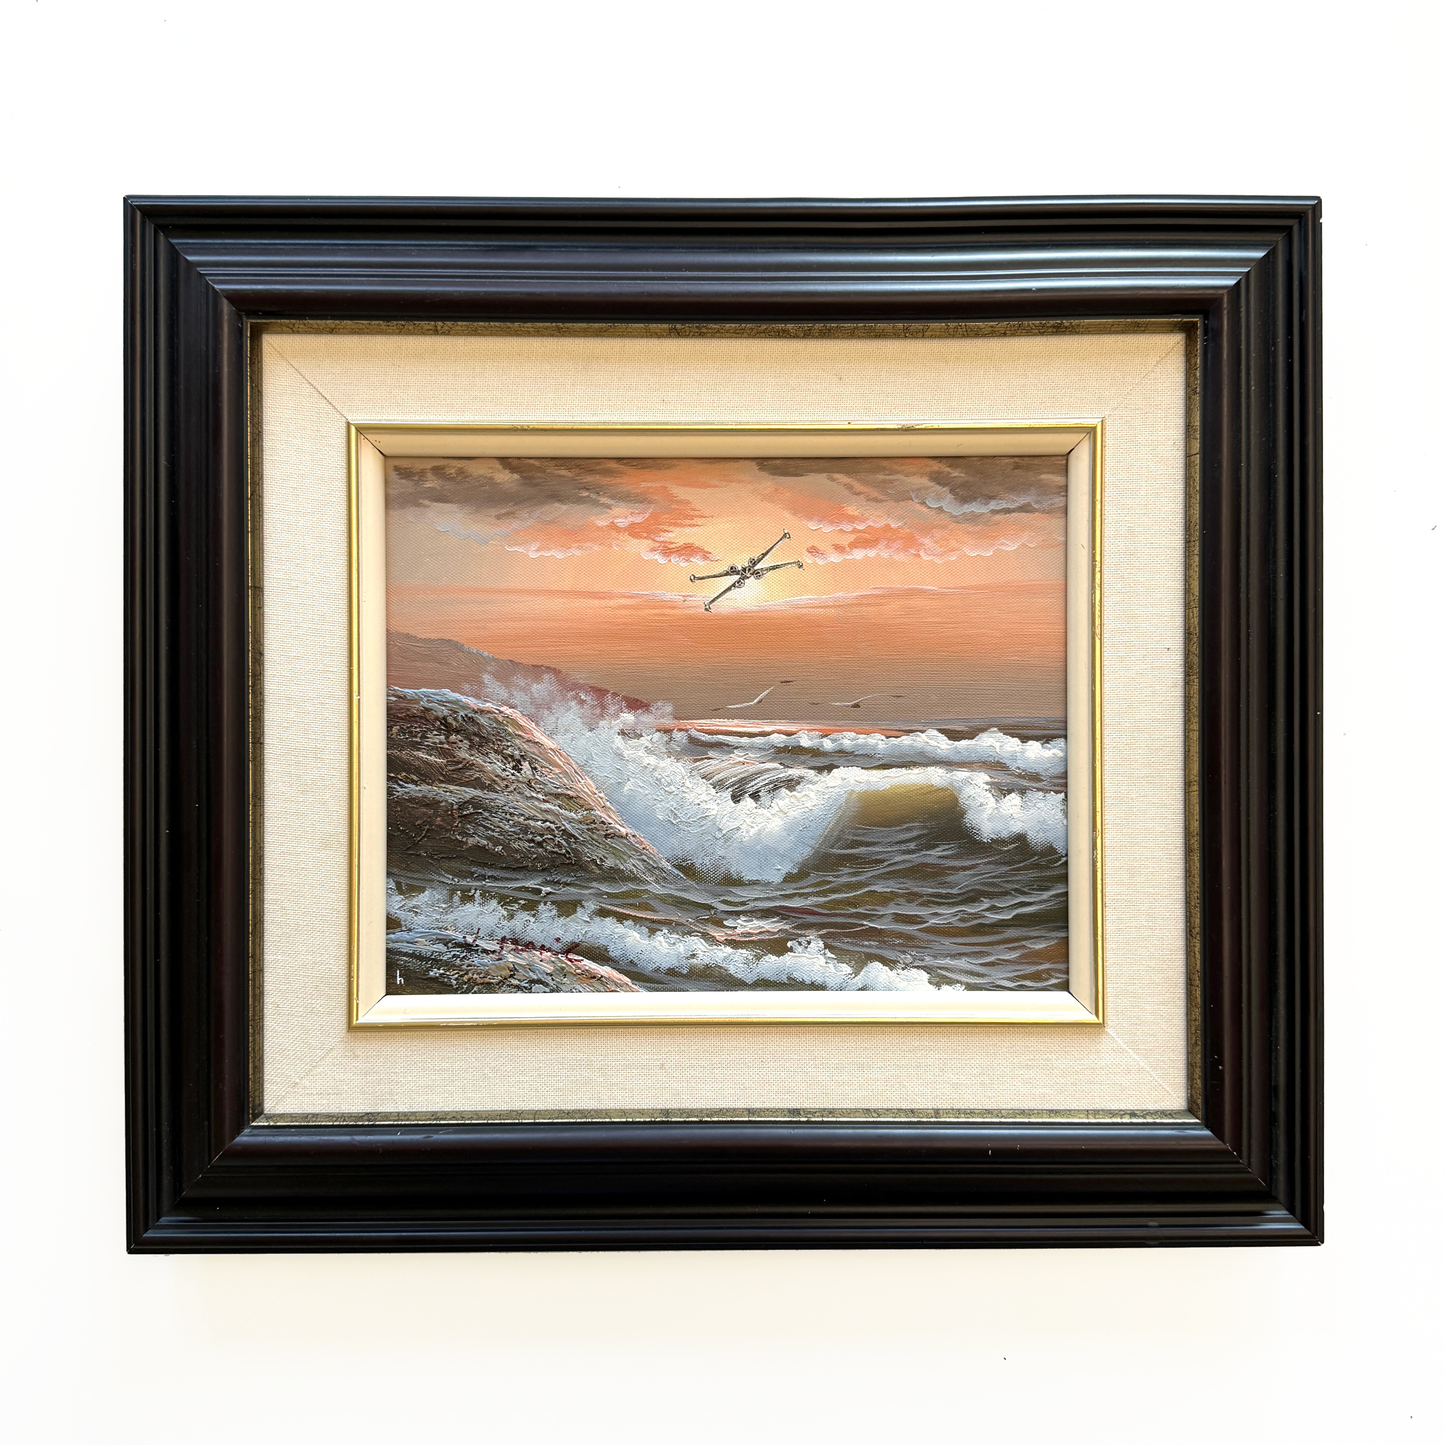 X-Wing with Seagulls, upcycled vintage painting